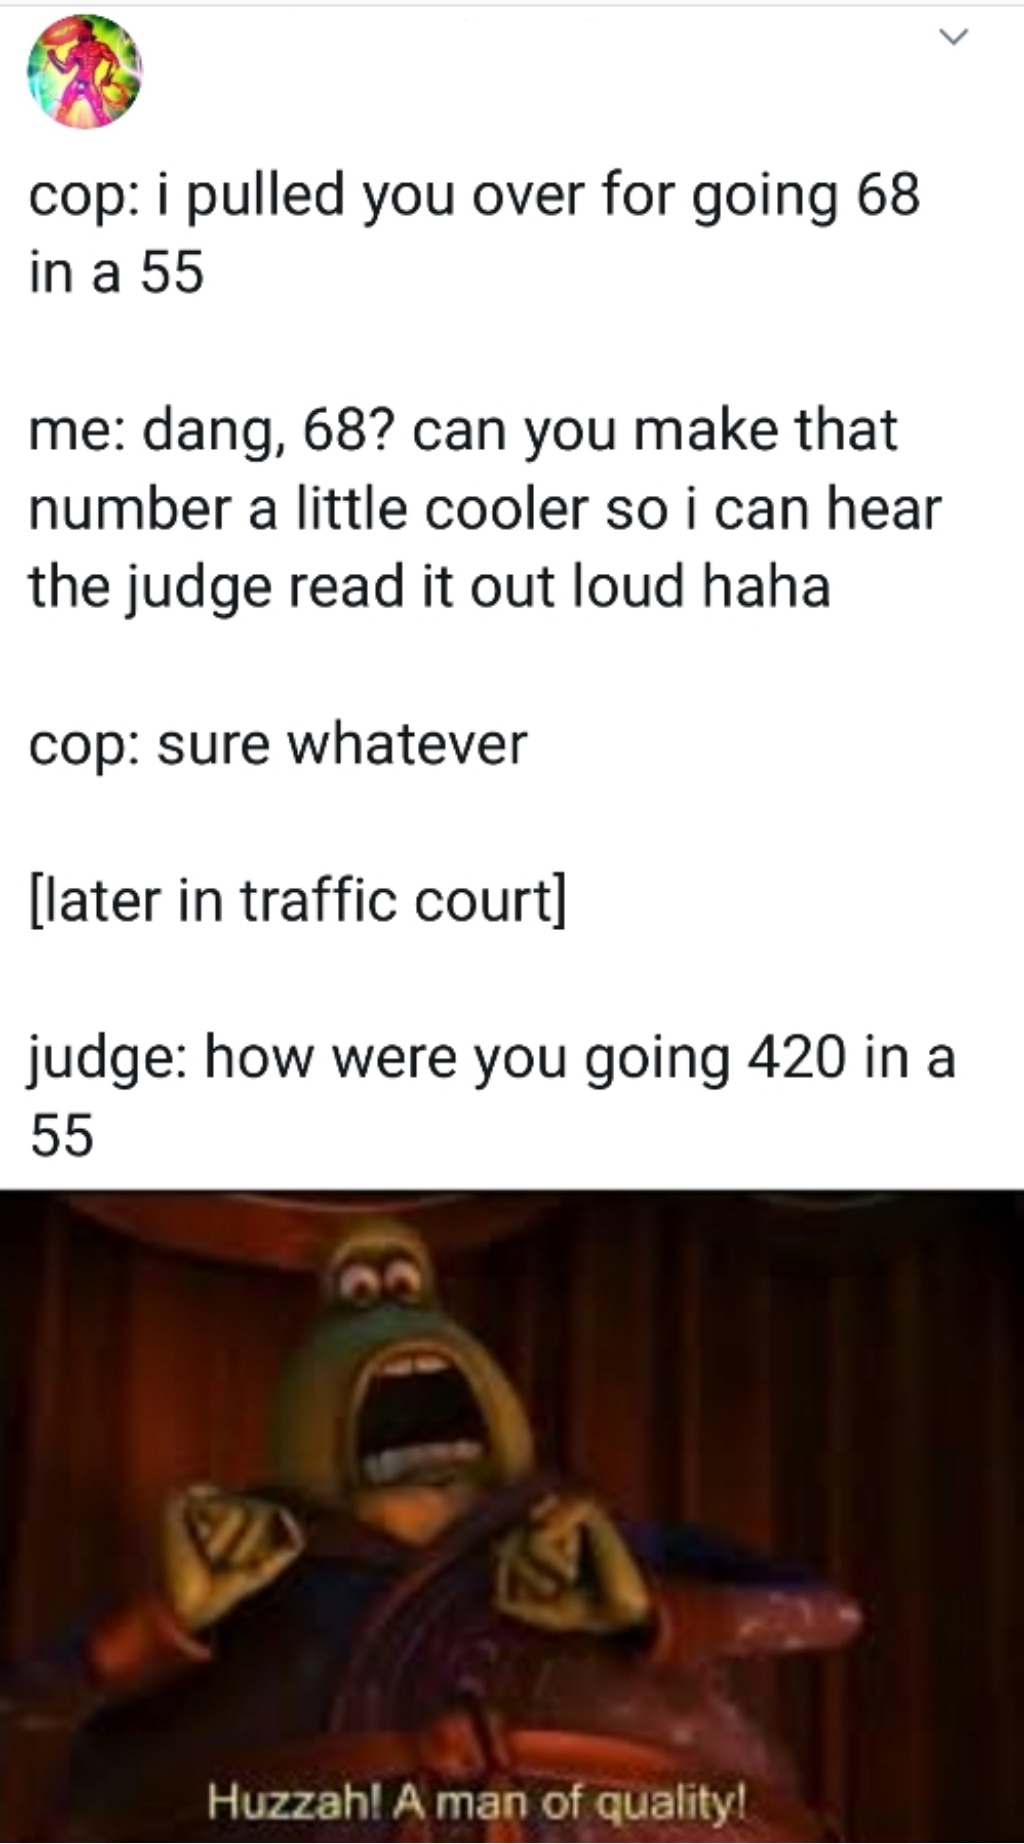 cop i pulled you over for going 68 in a 55 me dang, 68? can you make that number a little cooler so i can hear the judge read it out loud haha cop sure whatever later in traffic court judge how were you going 420 in a 55 'Huzzah! A man of quality!